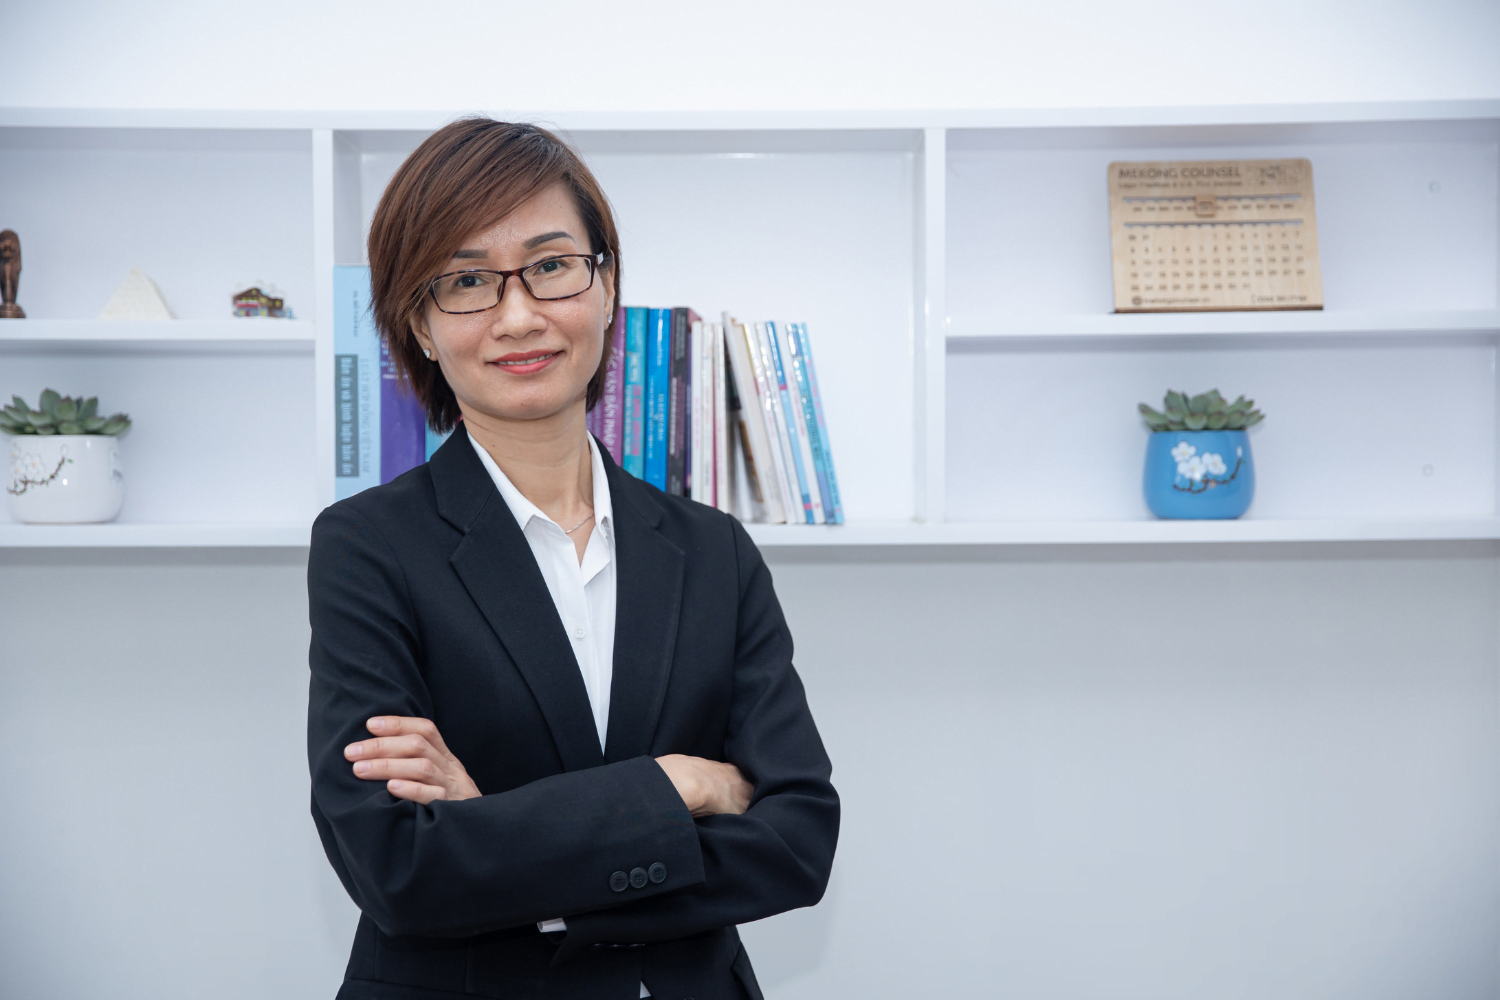 Mai Thi Le Quyen poses in front of a book shelf at her law firm in Vietnam